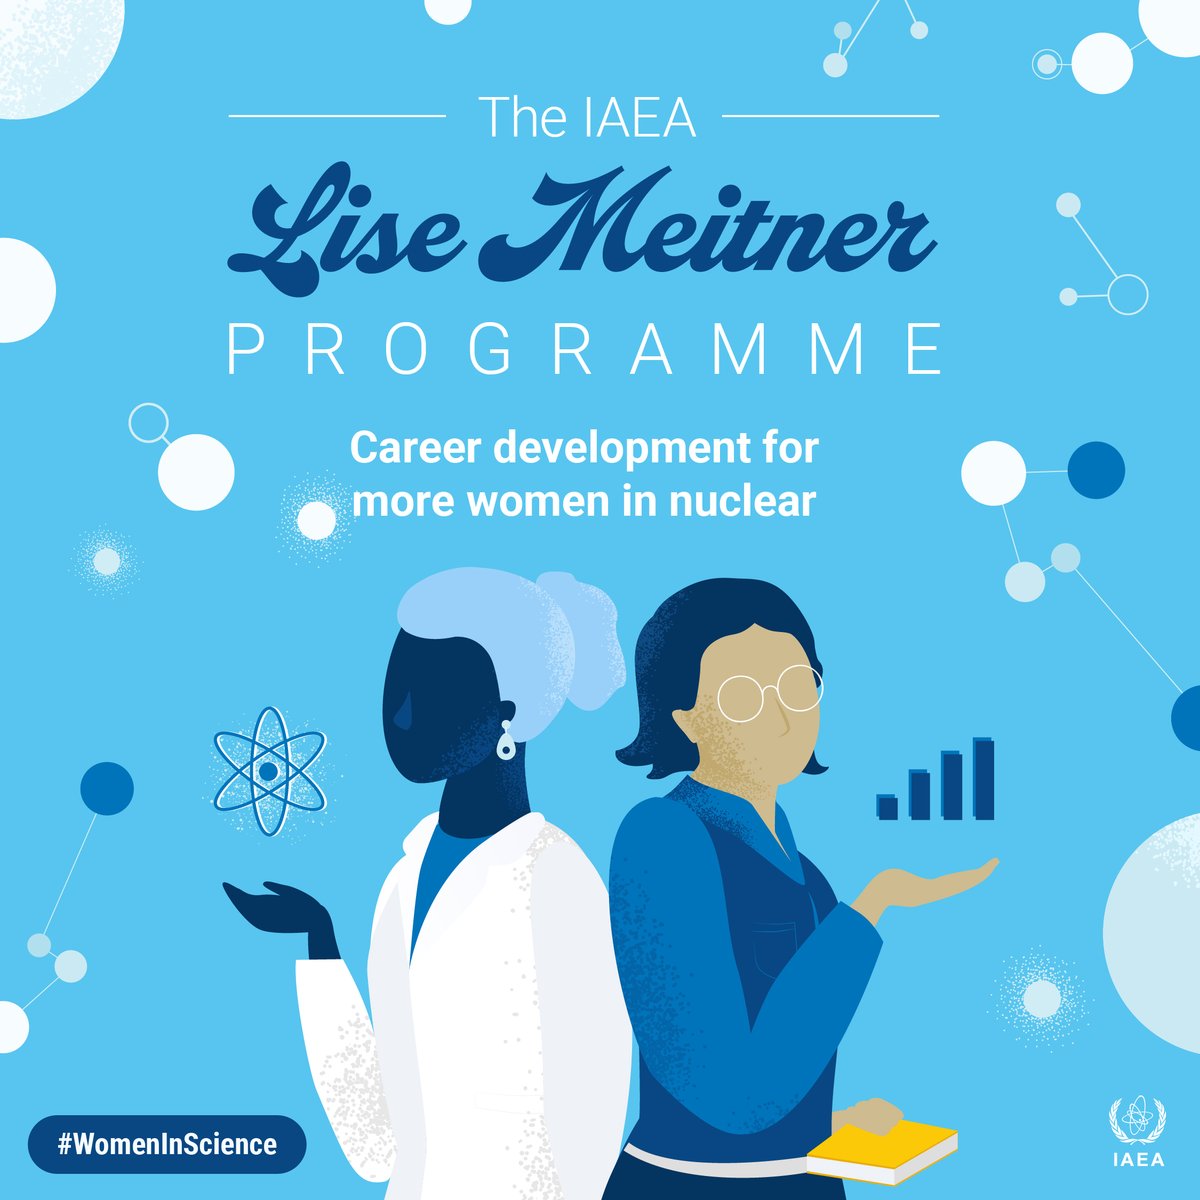 Our Lise Meitner Programme provides women professionals with opportunities to participate in a multi-week visiting professional programme & advance their technical and managerial skills.

Apply now ➡️ bit.ly/3Z5a90h #WomenInScience #PoweredByNuclear